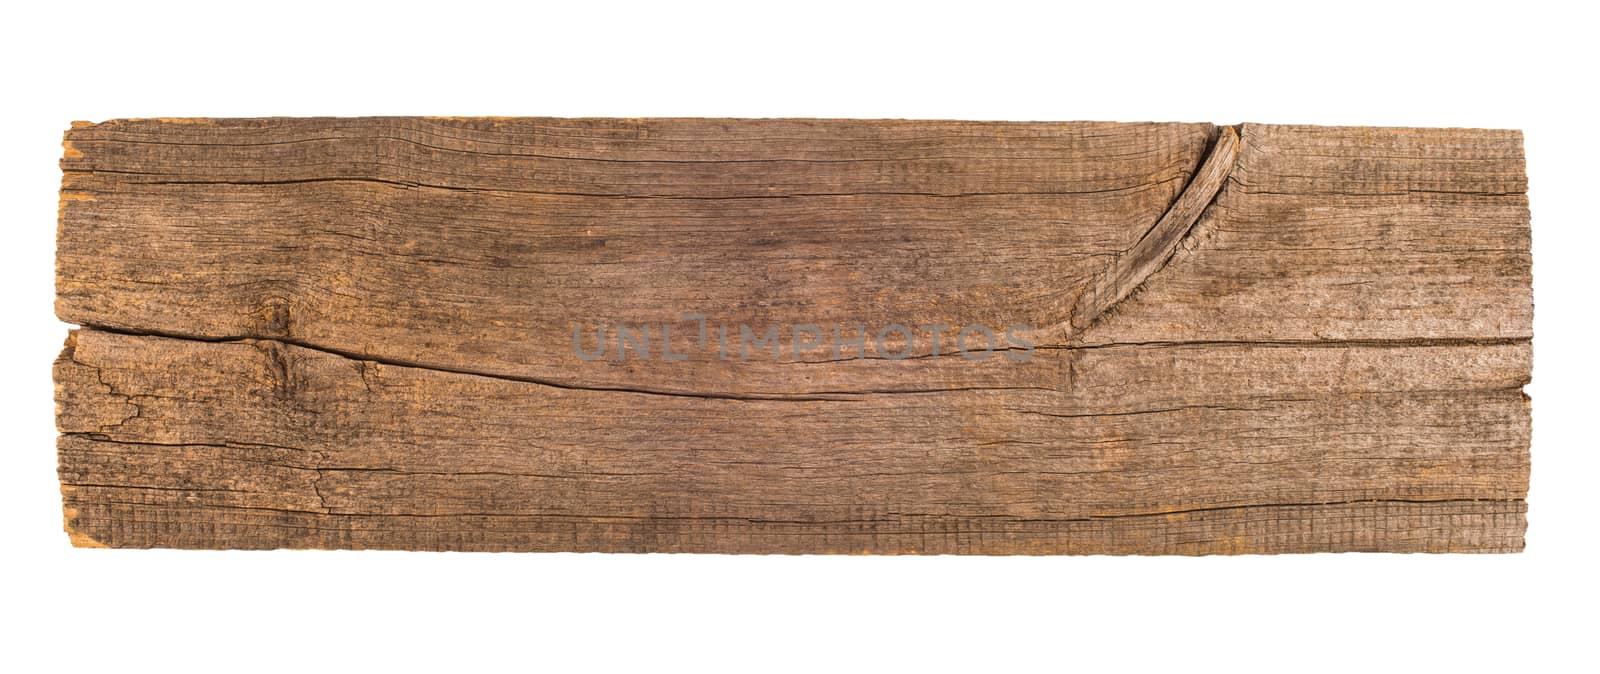 Old wooden board isolated on white background by DGolbay